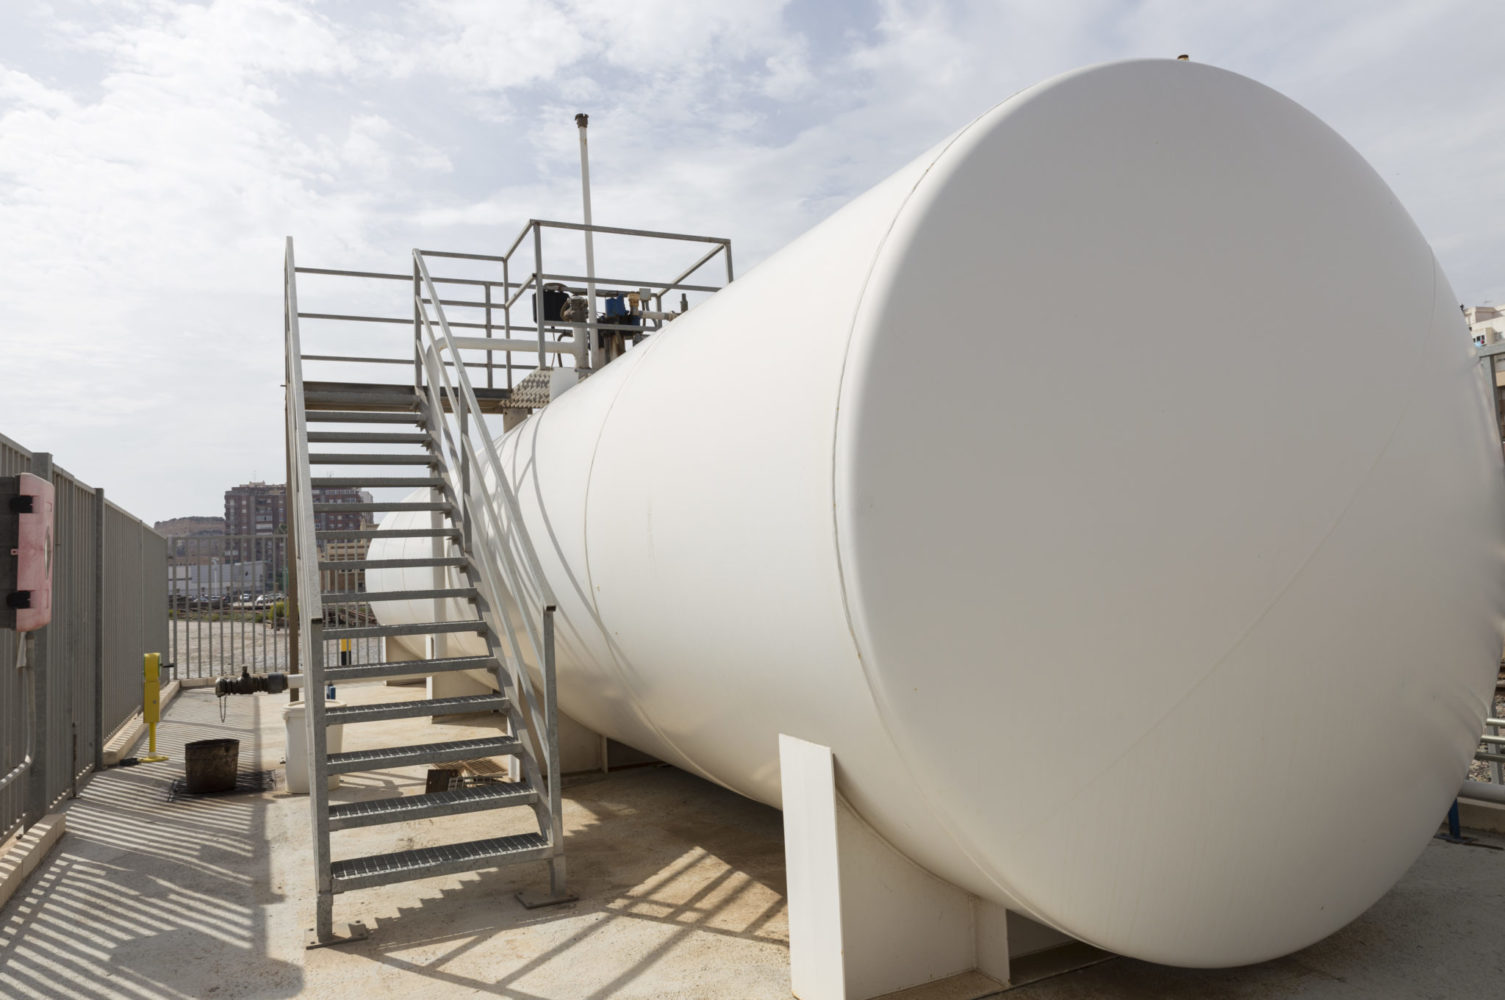 Best Insurance For Above or Below Ground Storage Tanks In Canada